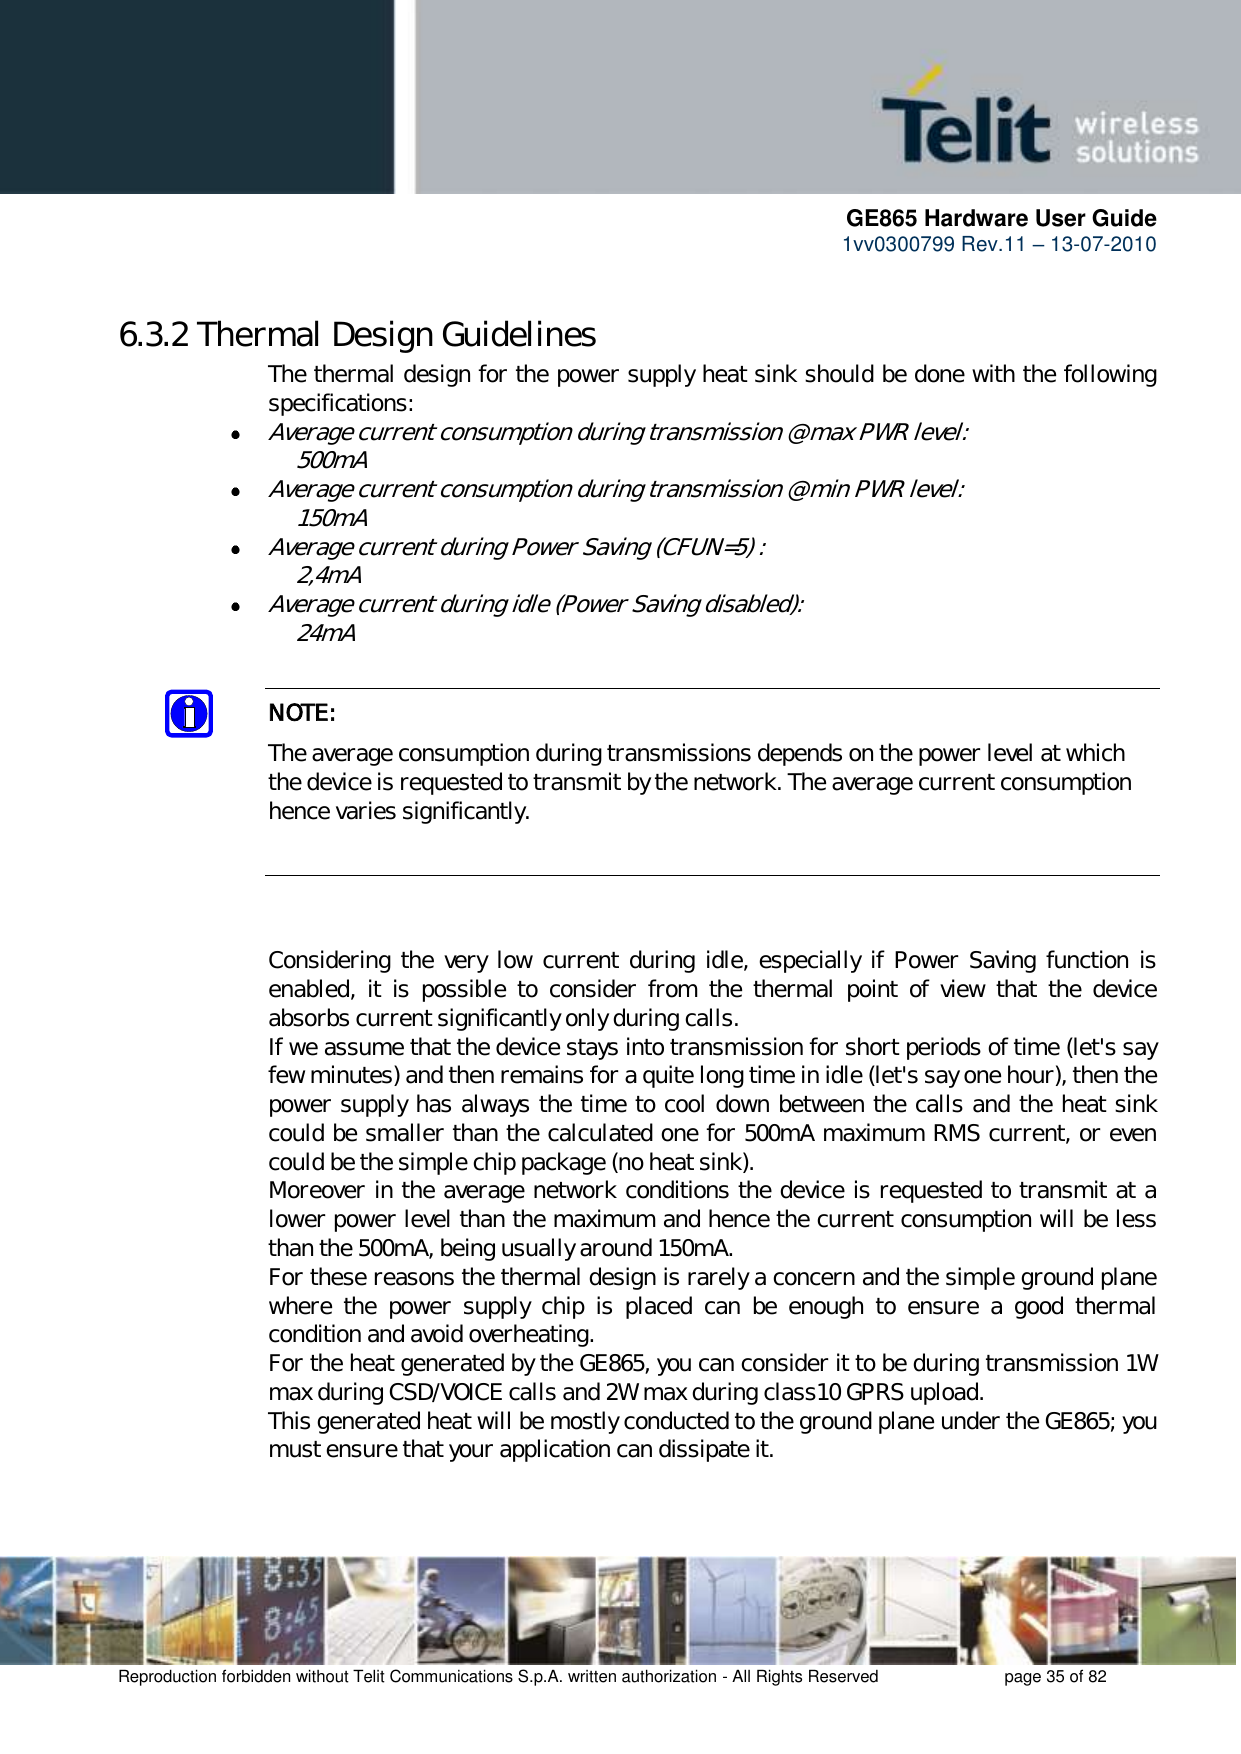      GE865 Hardware User Guide 1vv0300799 Rev.11 – 13-07-2010       Reproduction forbidden without Telit Communications S.p.A. written authorization - All Rights Reserved    page 35 of 82  6.3.2 Thermal Design Guidelines The thermal design for the power supply heat sink should be done with the following specifications:  Average current consumption during transmission @ max PWR level:  500mA  Average current consumption during transmission @ min PWR level:   150mA   Average current during Power Saving (CFUN=5) :       2,4mA  Average current during idle (Power Saving disabled):   24mA  NOTE: The average consumption during transmissions depends on the power level at which the device is requested to transmit by the network. The average current consumption hence varies significantly.    Considering the very low current during idle, especially if  Power Saving function is enabled,  it  is  possible  to  consider  from  the  thermal  point  of  view  that  the  device absorbs current significantly only during calls.  If we assume that the device stays into transmission for short periods of time (let&apos;s say few minutes) and then remains for a quite long time in idle (let&apos;s say one hour), then the power supply has always the time to cool down between the calls and the heat sink could be smaller than the calculated one for 500mA maximum RMS current, or even could be the simple chip package (no heat sink). Moreover in the average network conditions the device is requested to transmit at a lower power level than the maximum and hence the current consumption will be less than the 500mA, being usually around 150mA. For these reasons the thermal design is rarely a concern and the simple ground plane where  the  power  supply  chip  is  placed  can  be  enough  to  ensure  a  good  thermal condition and avoid overheating.  For the heat generated by the GE865, you can consider it to be during transmission 1W max during CSD/VOICE calls and 2W max during class10 GPRS upload.  This generated heat will be mostly conducted to the ground plane under the GE865; you must ensure that your application can dissipate it.  